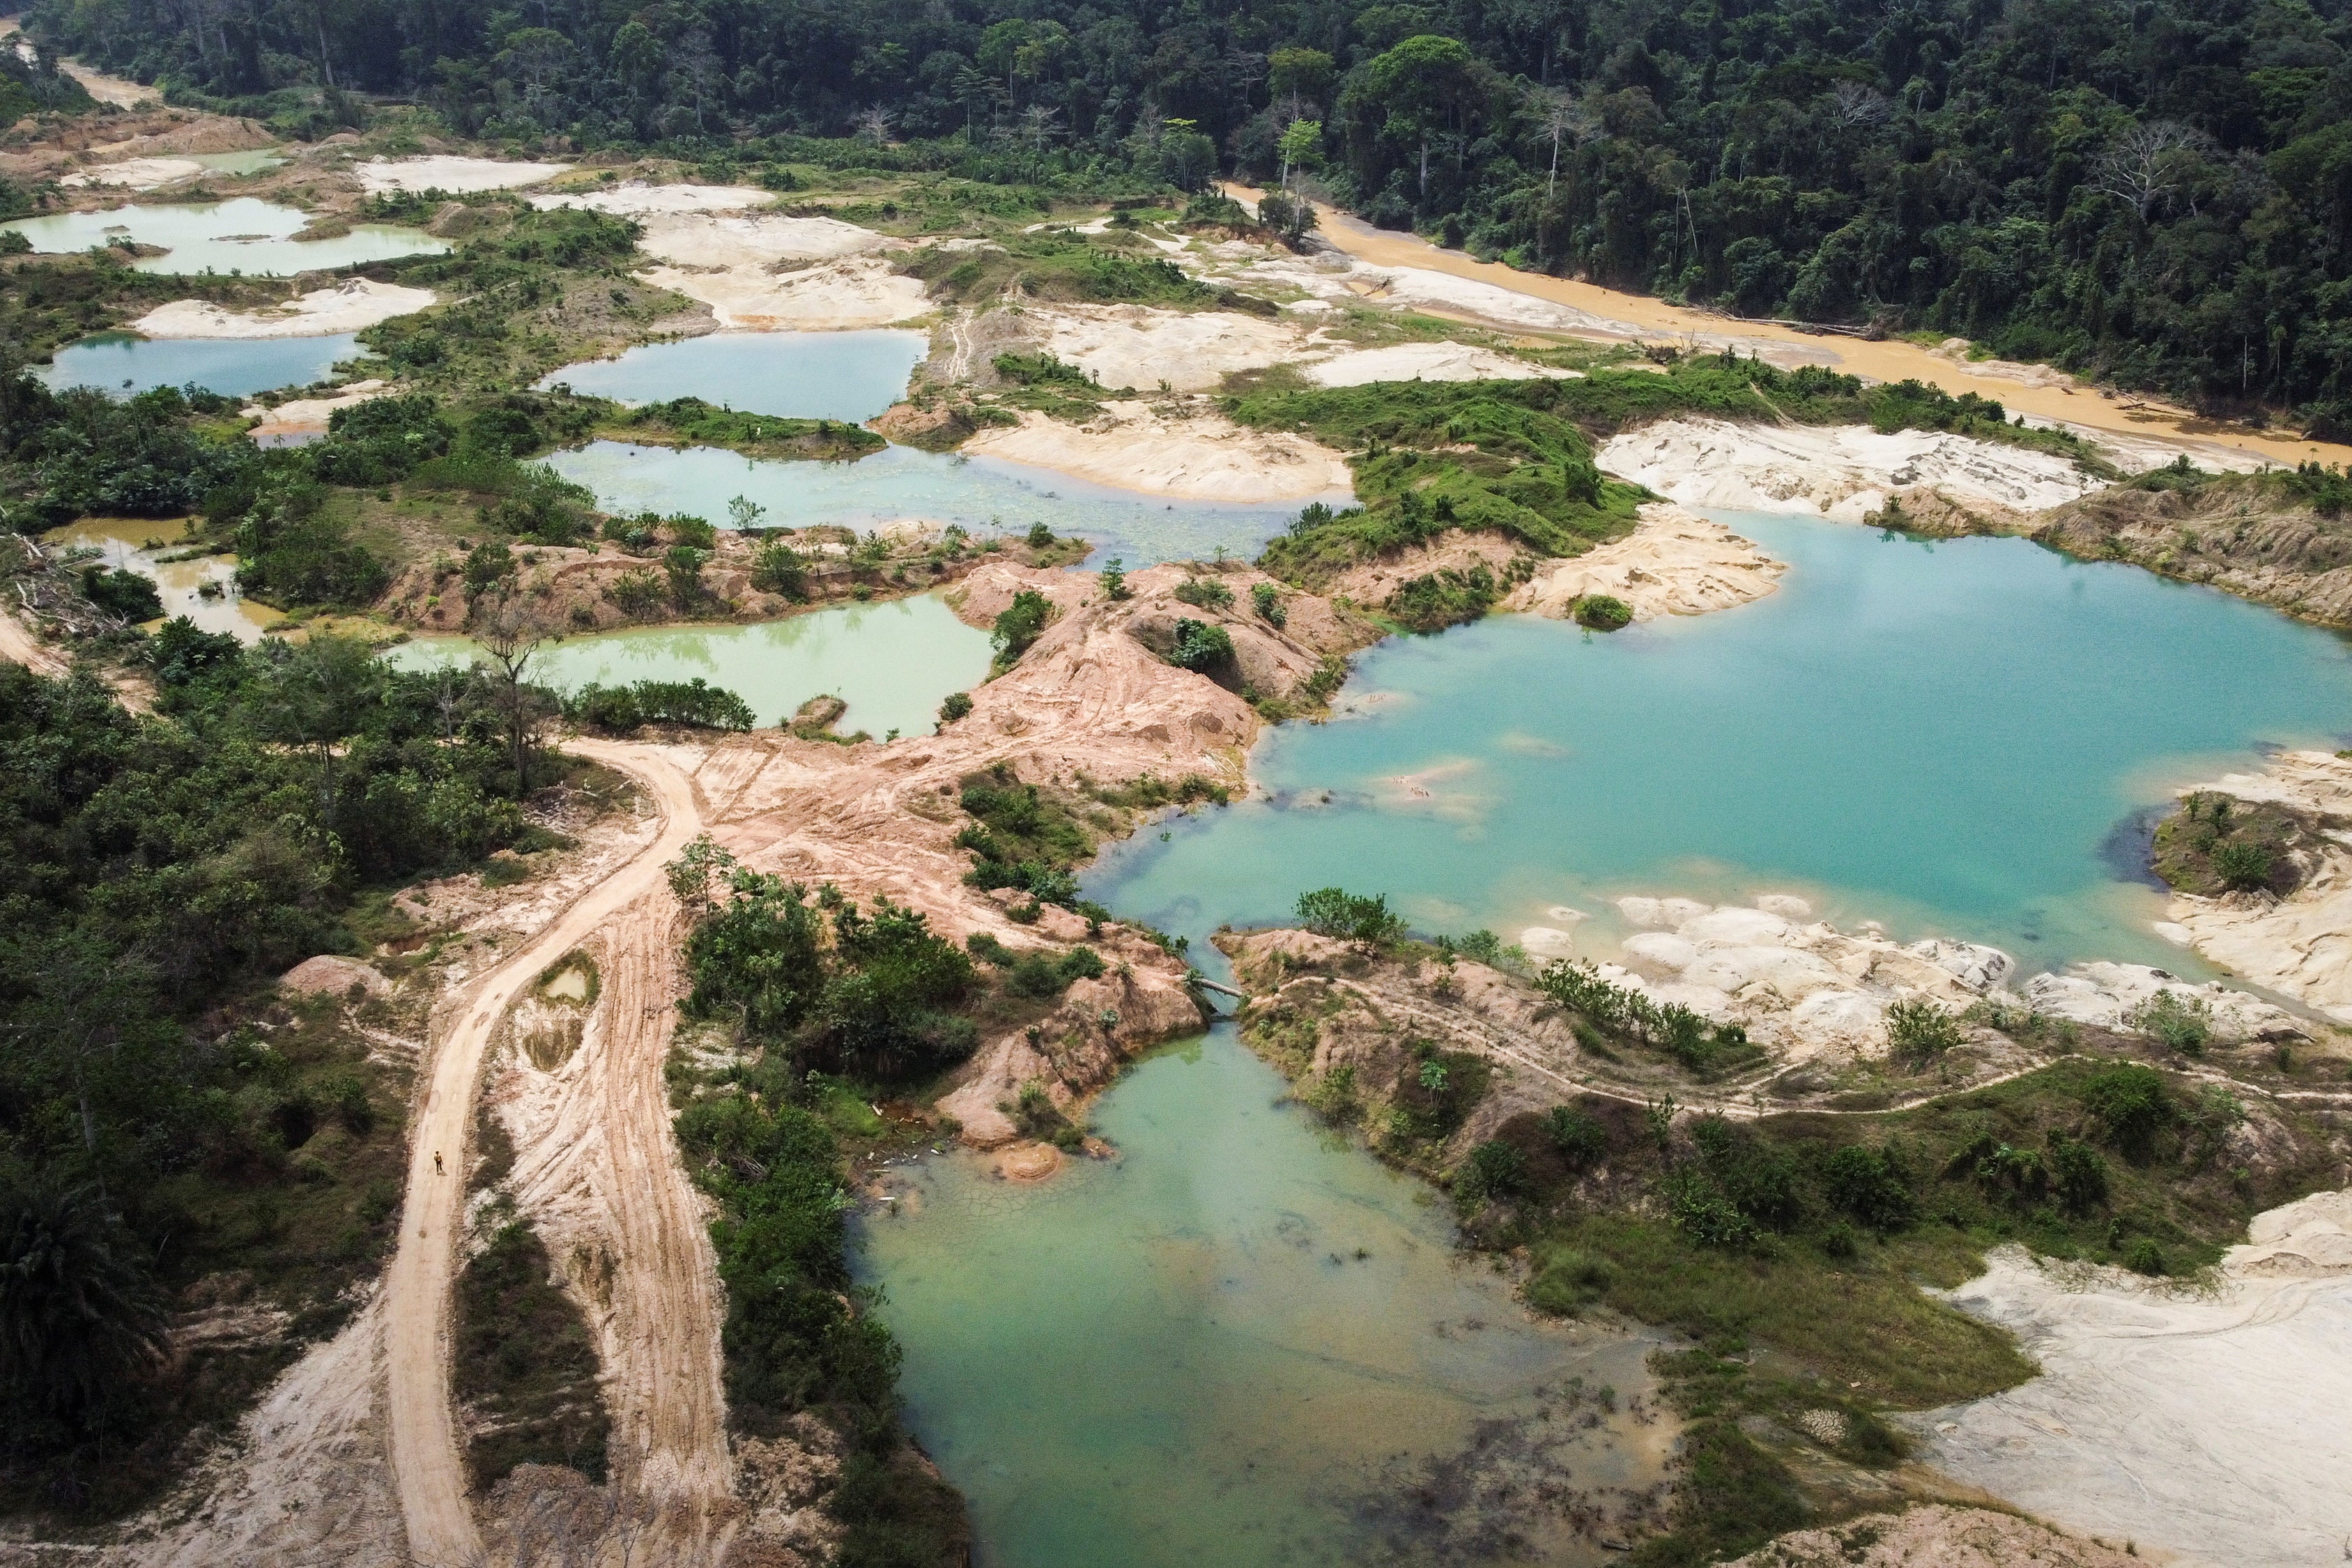 A drone view shows sections of a cocoa plantation, destroyed by illegal gold mining activities, in the Samreboi community in Ghana’s Western region